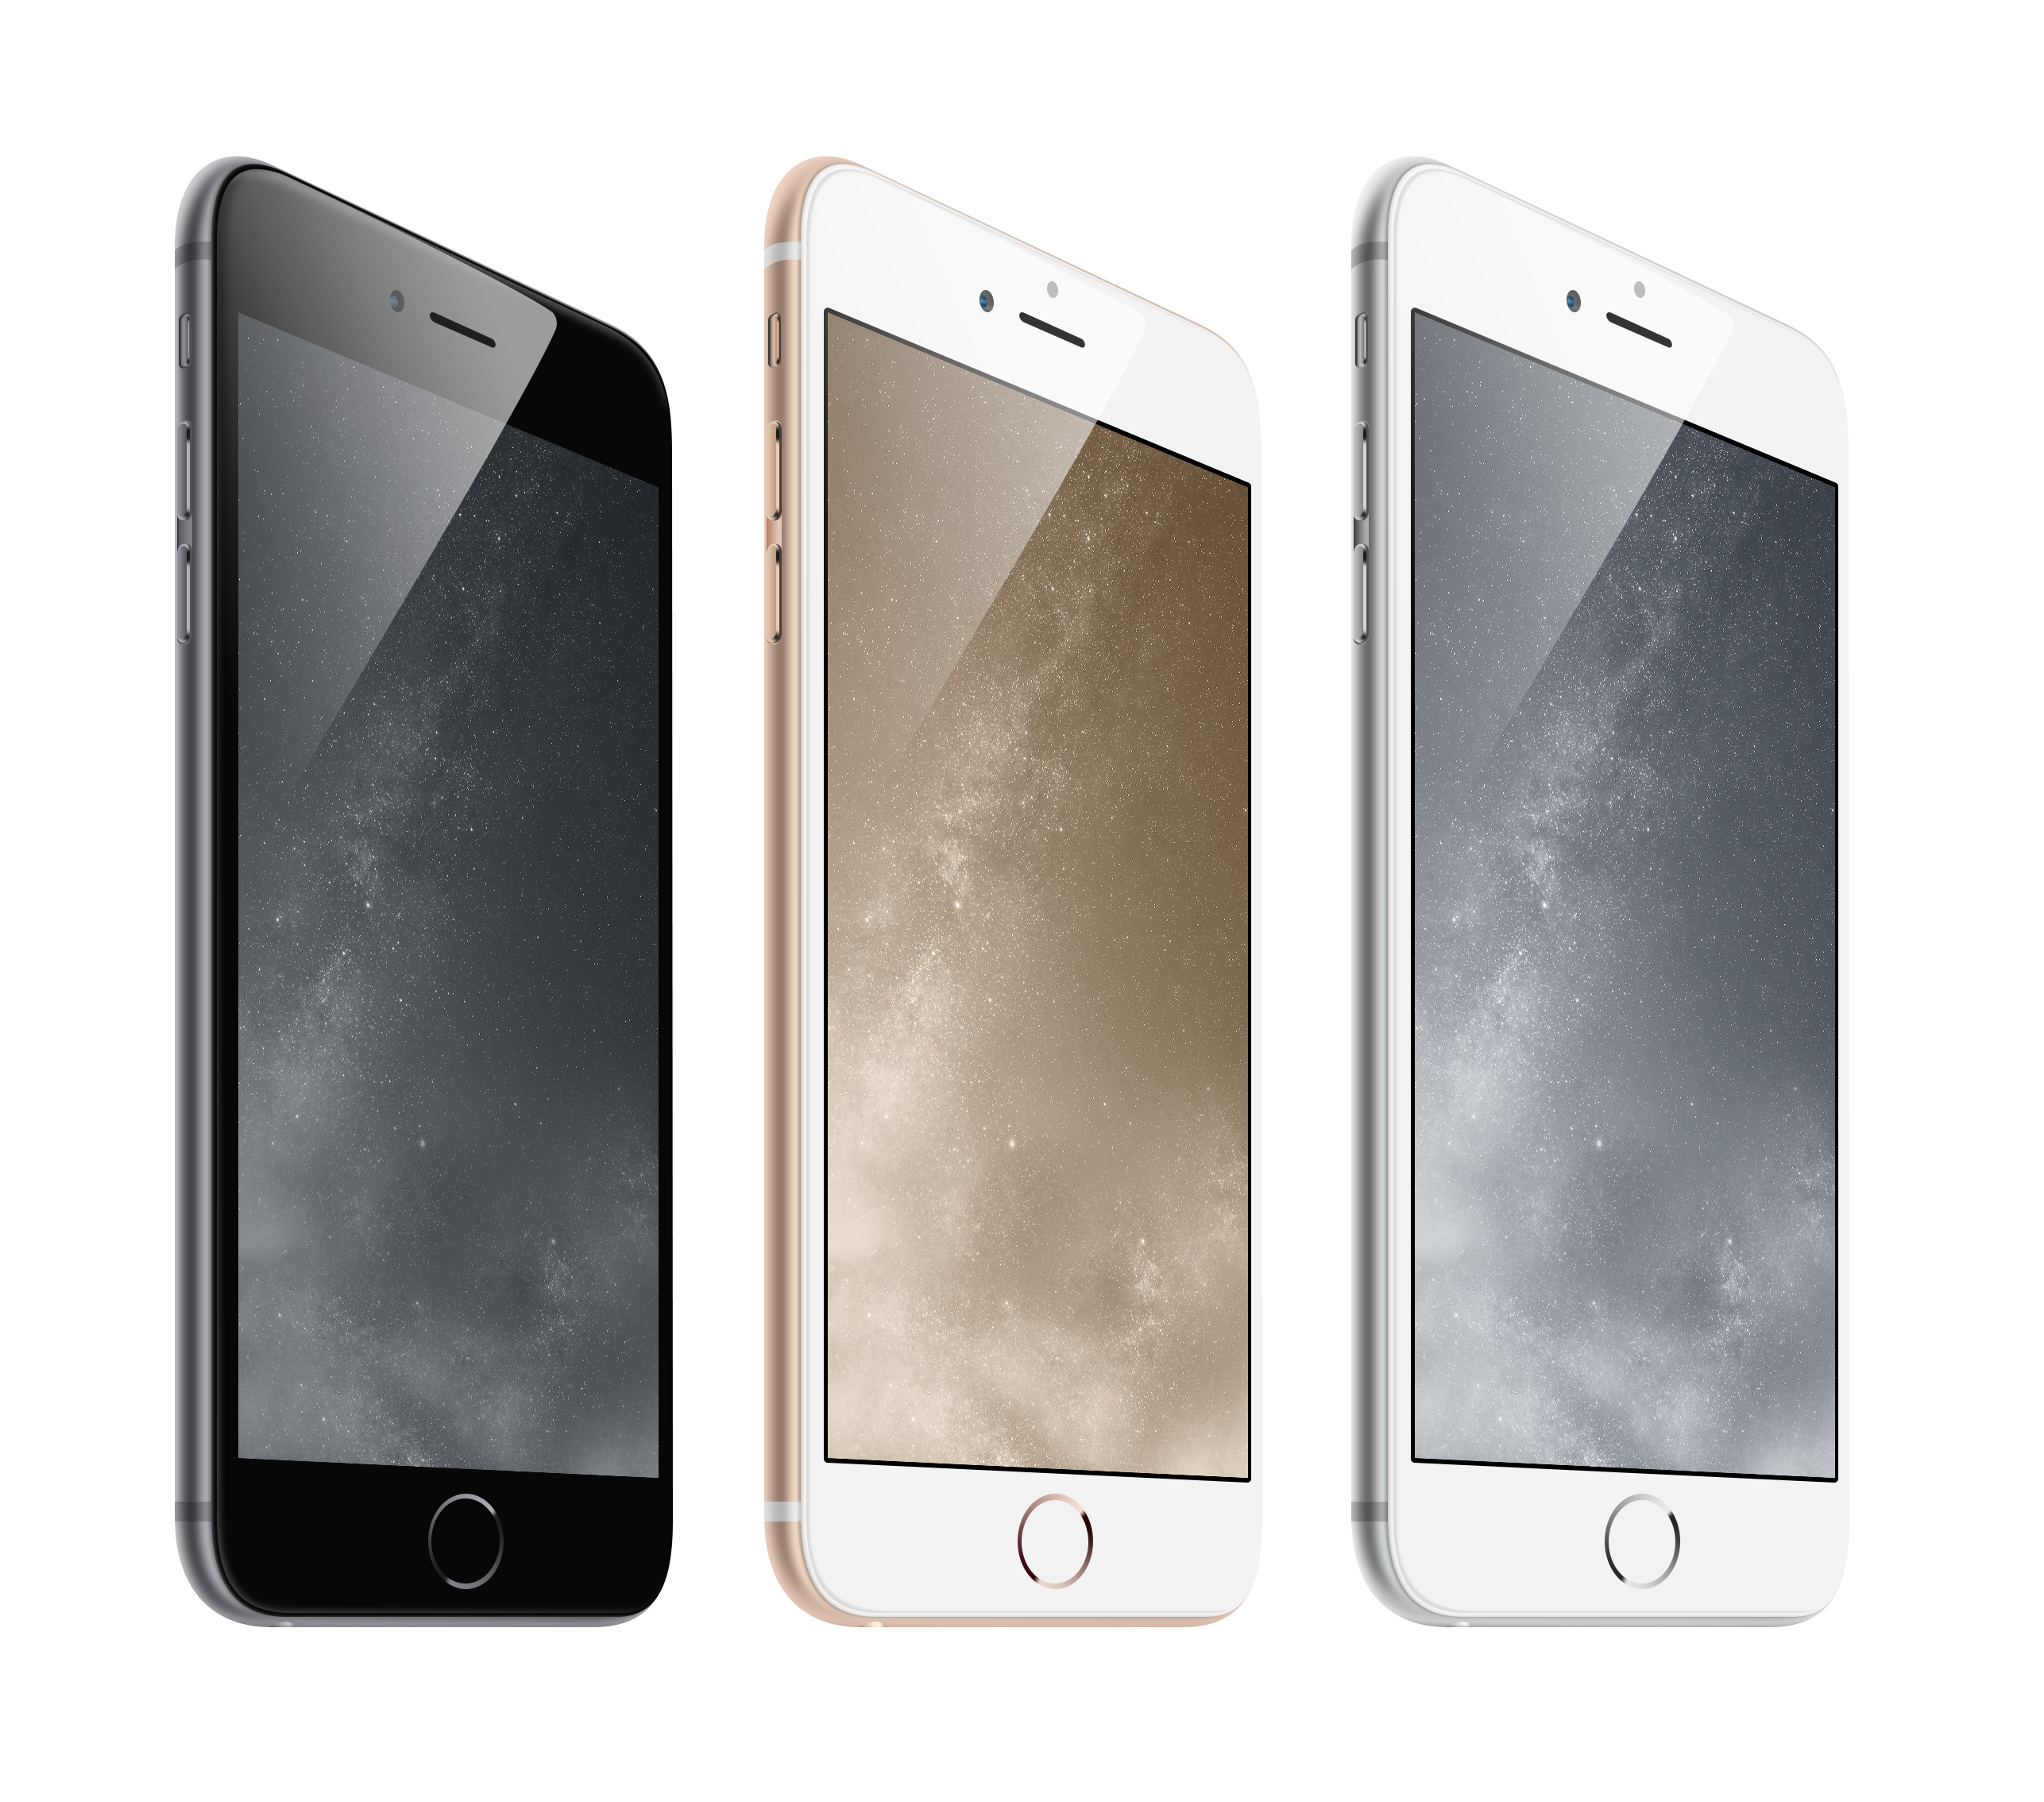 Stars Wallpapers for iPhone 6 and 6 Plus